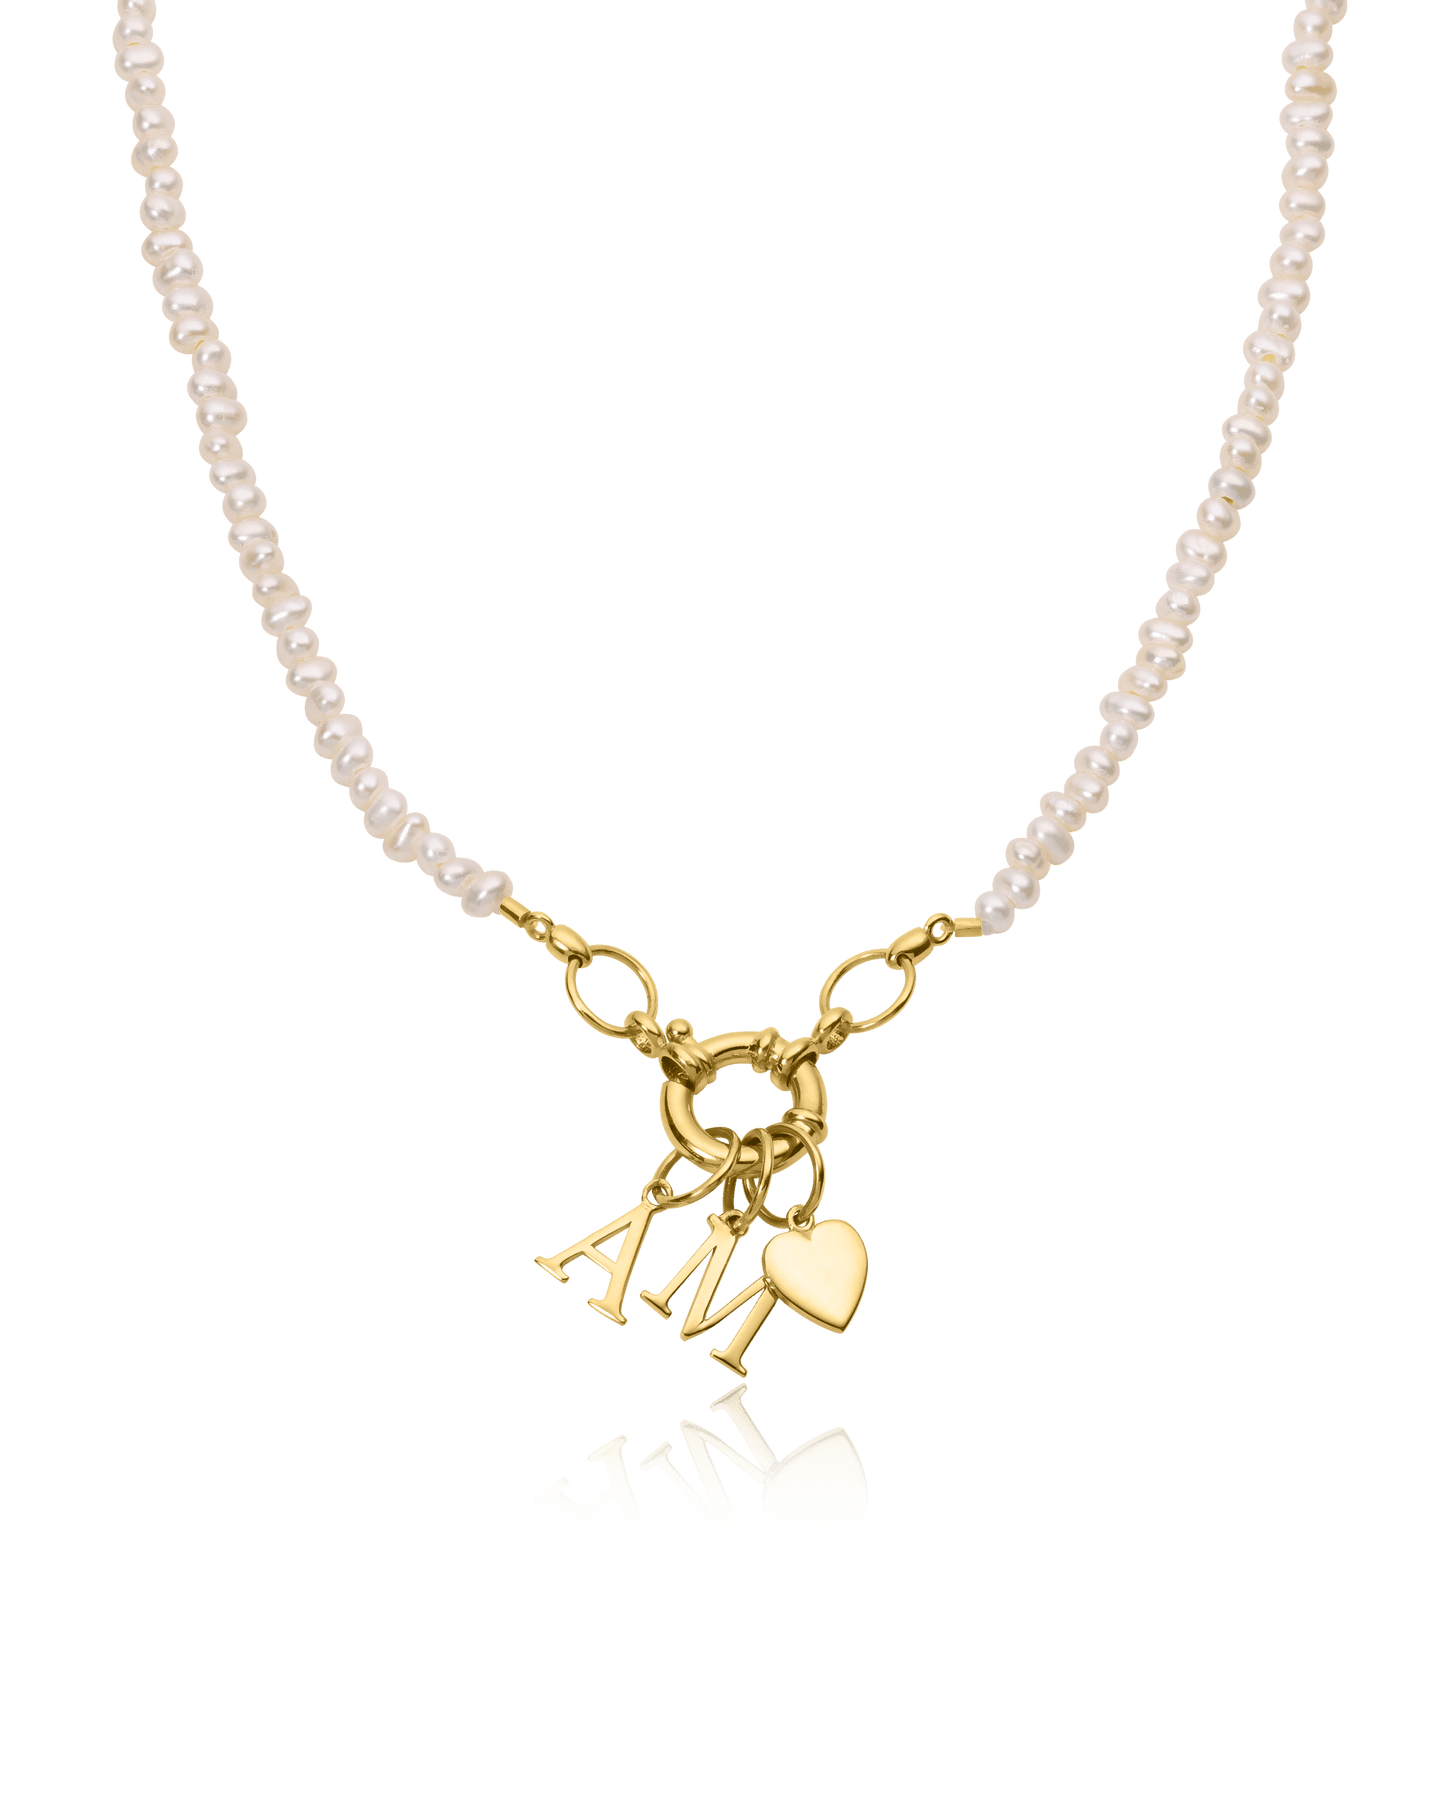 Green Jade Charm Lock Necklace - 18K Gold Vermeil Necklaces magal-dev Pearl (OUT OF STOCK) 1 Charm 16"